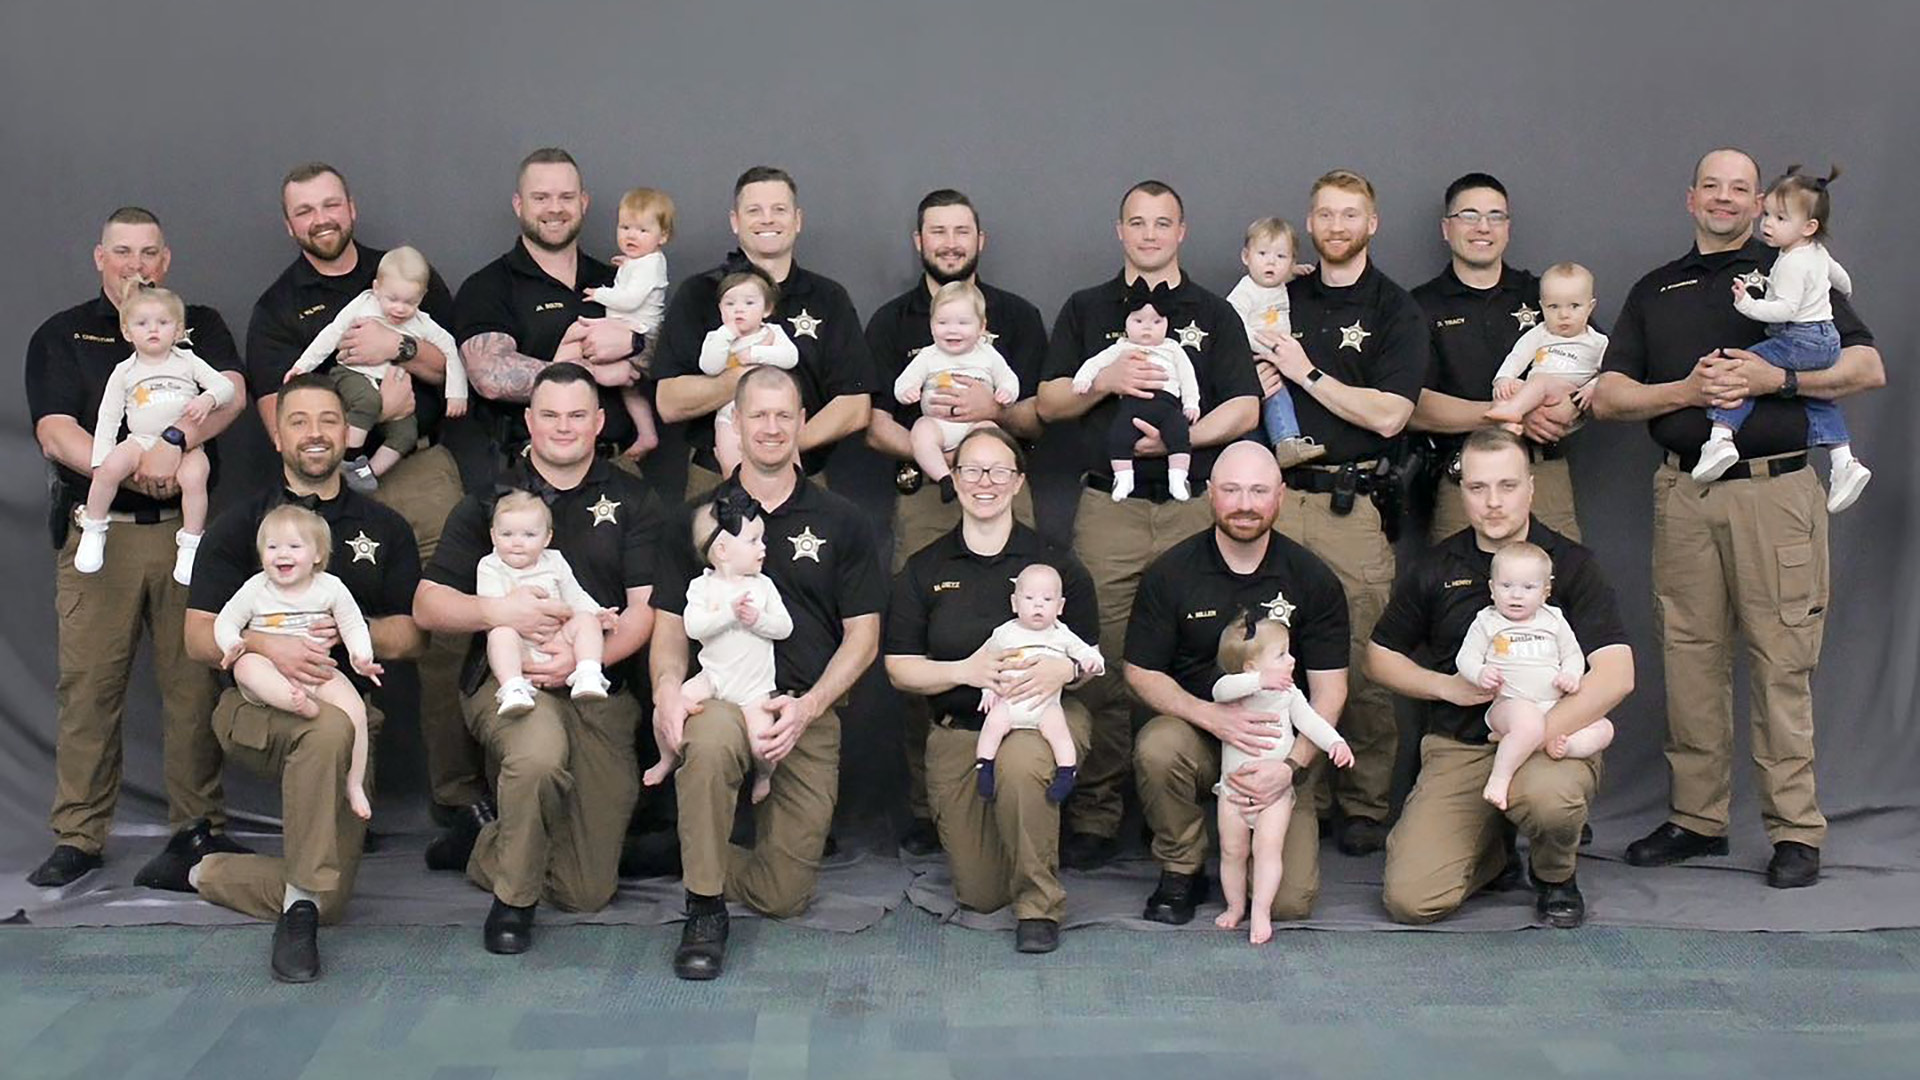 Boone County Sheriff’s Office celebrates “baby boom” with an adorable group photo